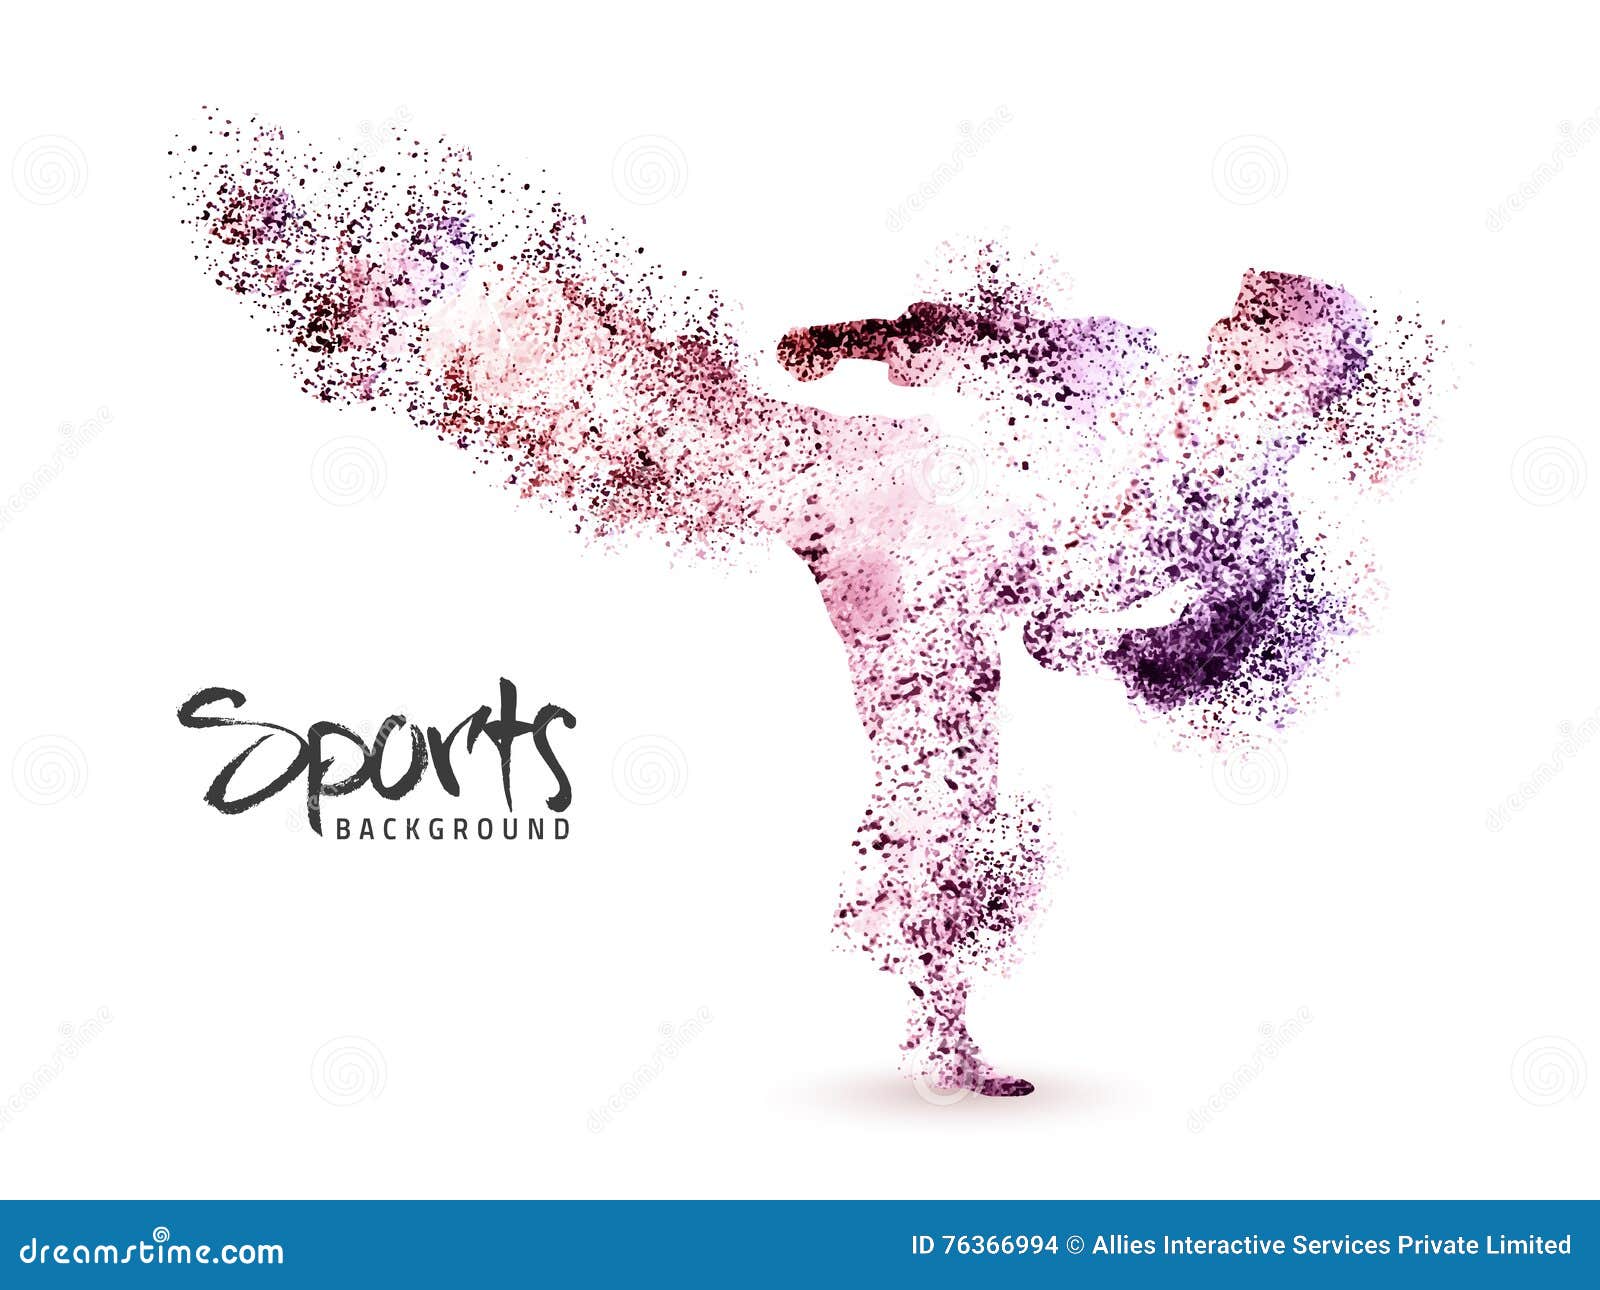 sports background with judo fighter.